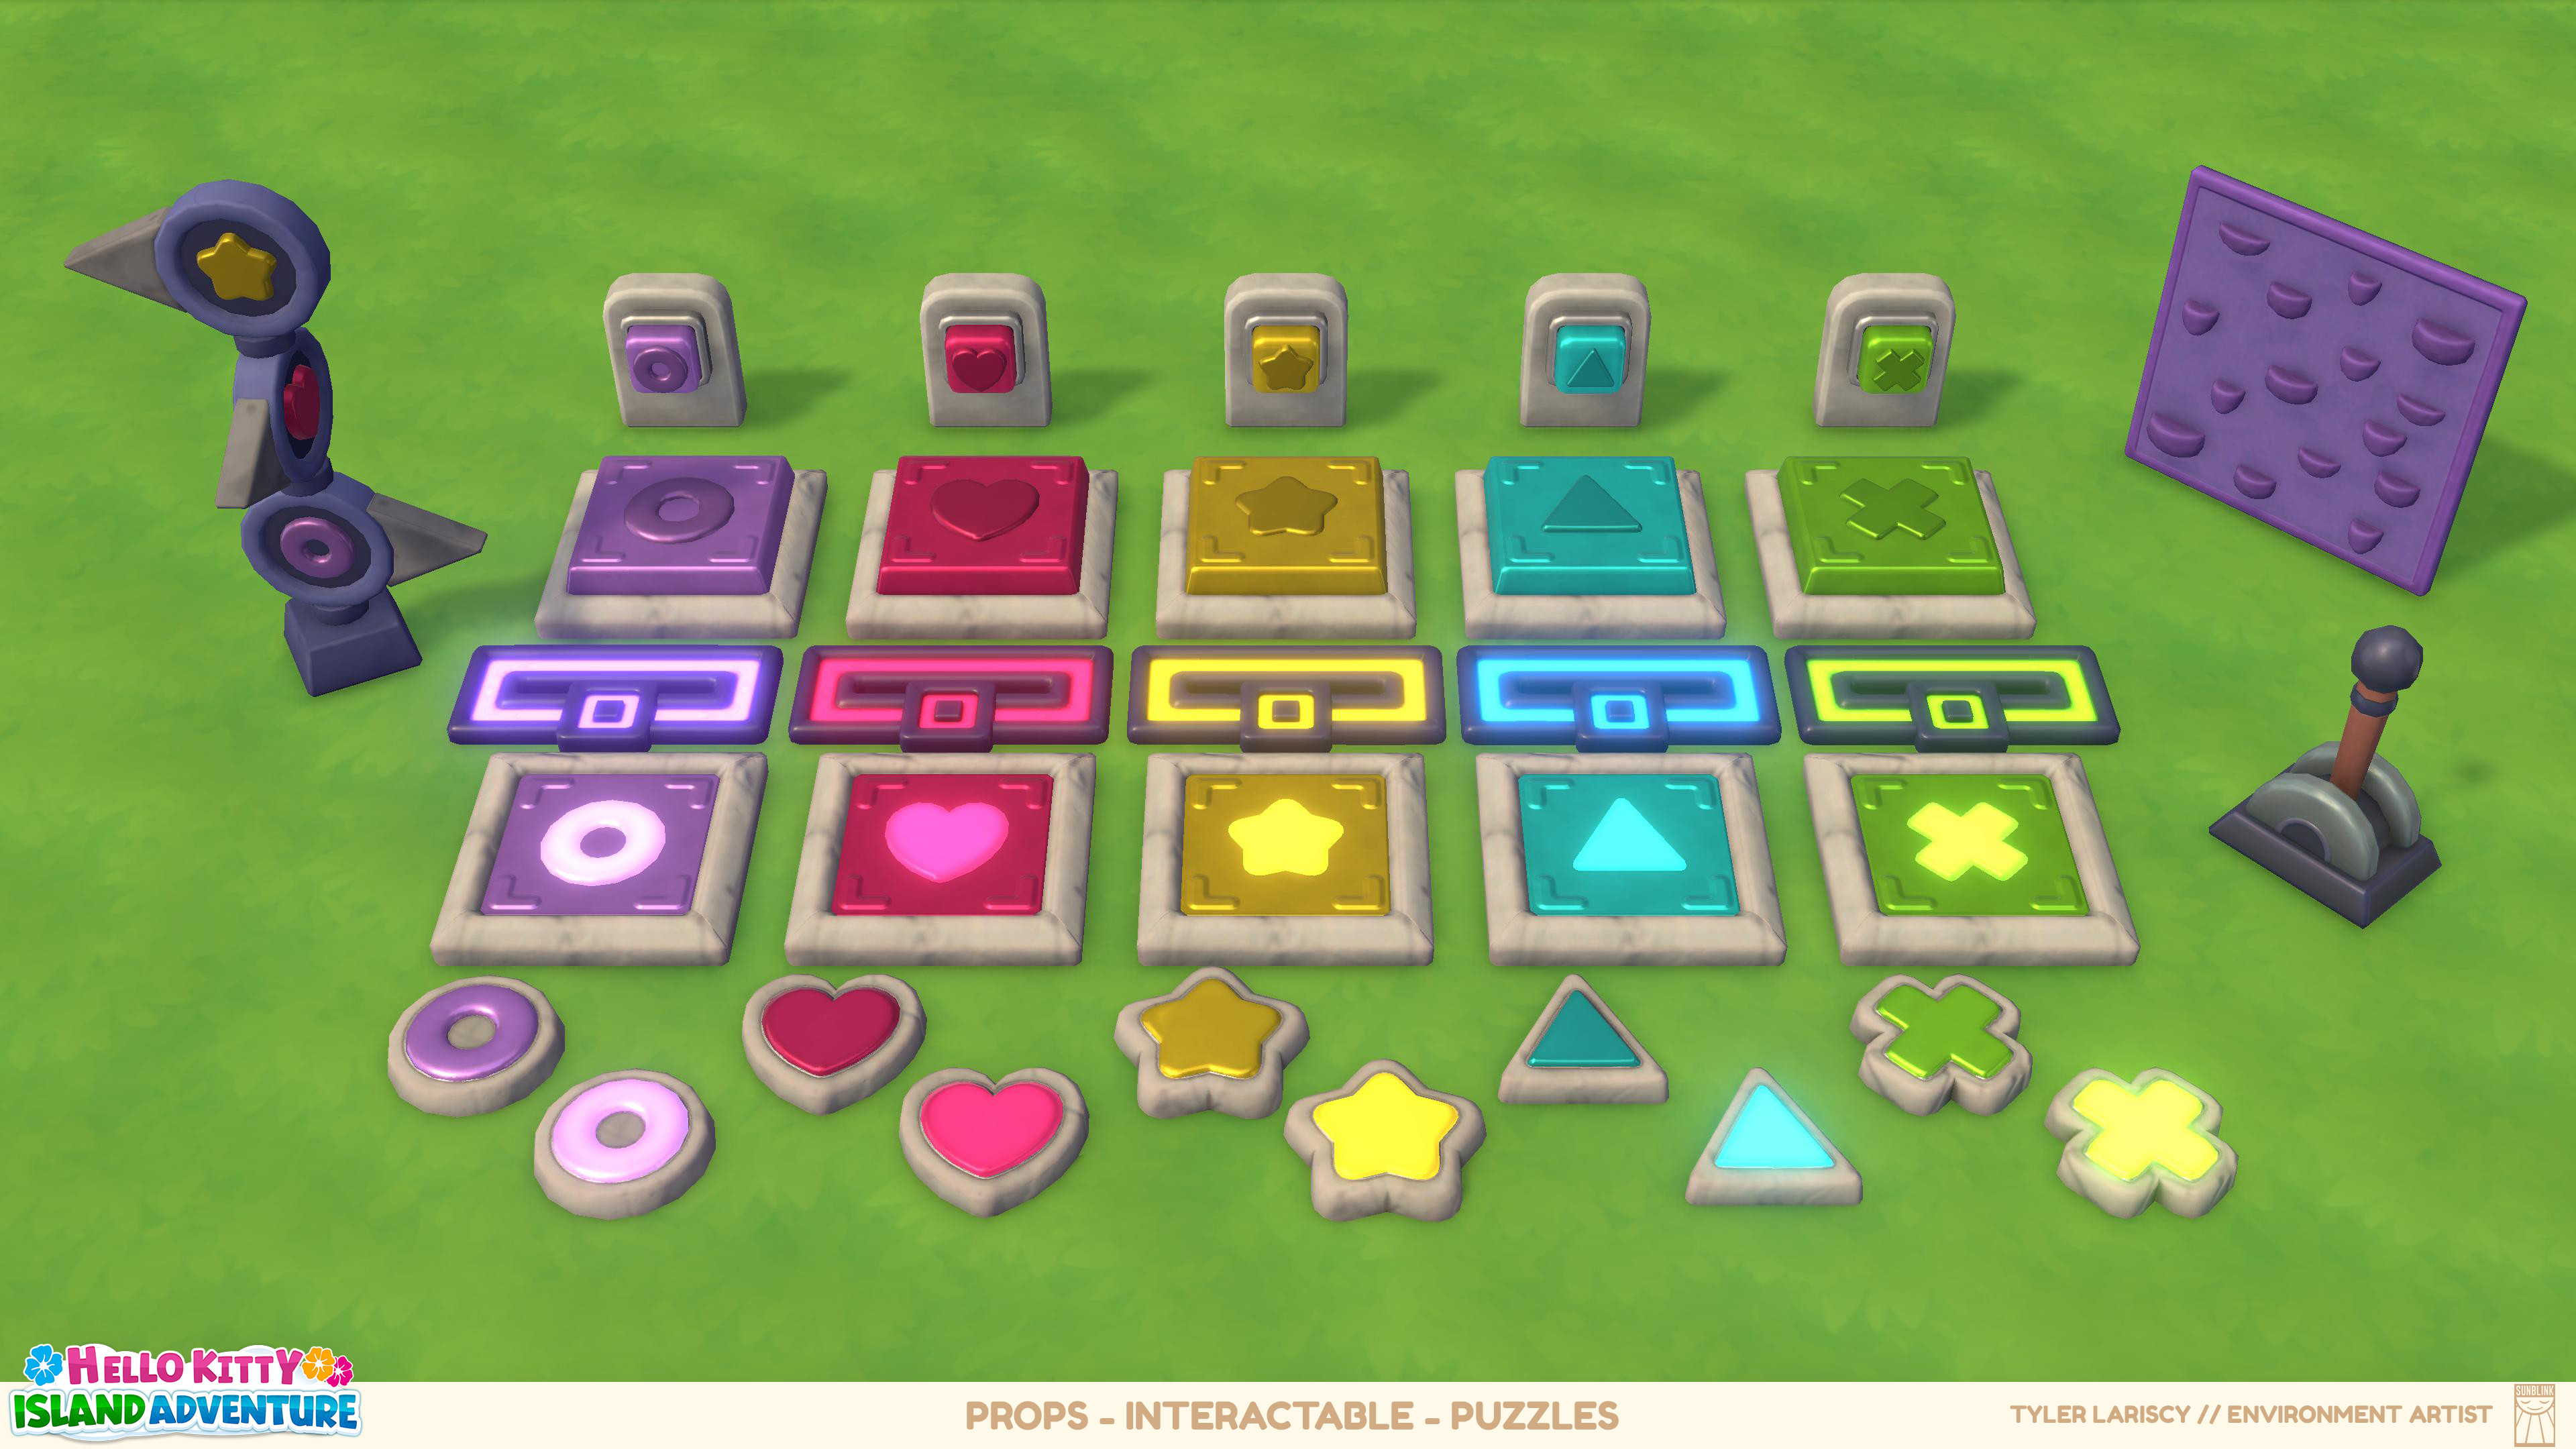 Interactable assets utilized by the Designers on the game to create a wide range of puzzles.